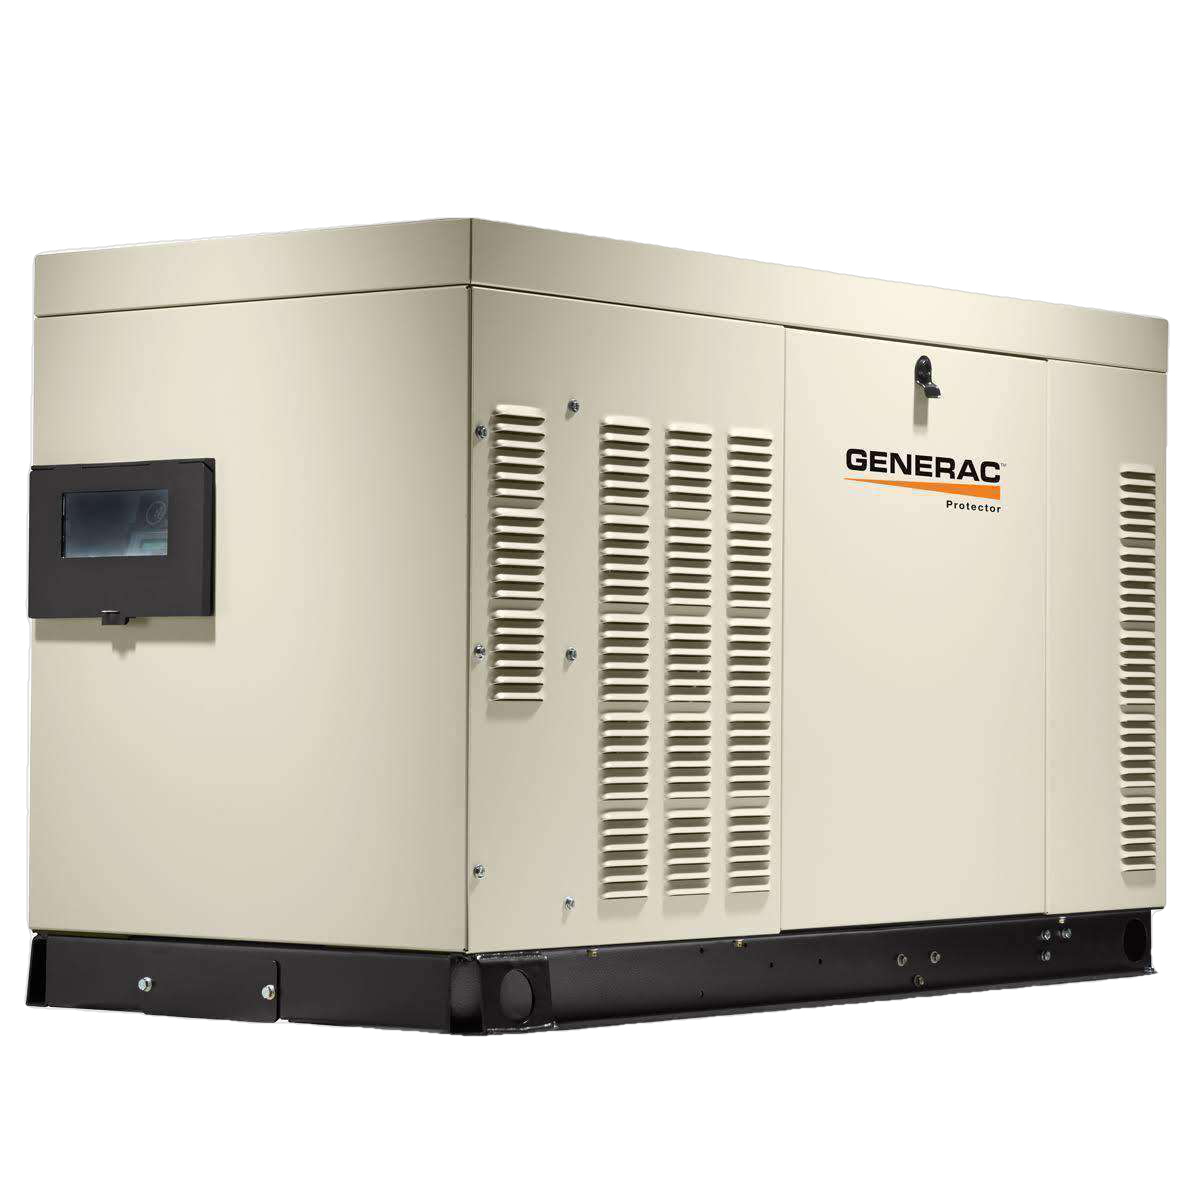 Generac Protector RG03015GNAX 30kW Liquid Cooled 3 Phase 120/208v Standby Generator New